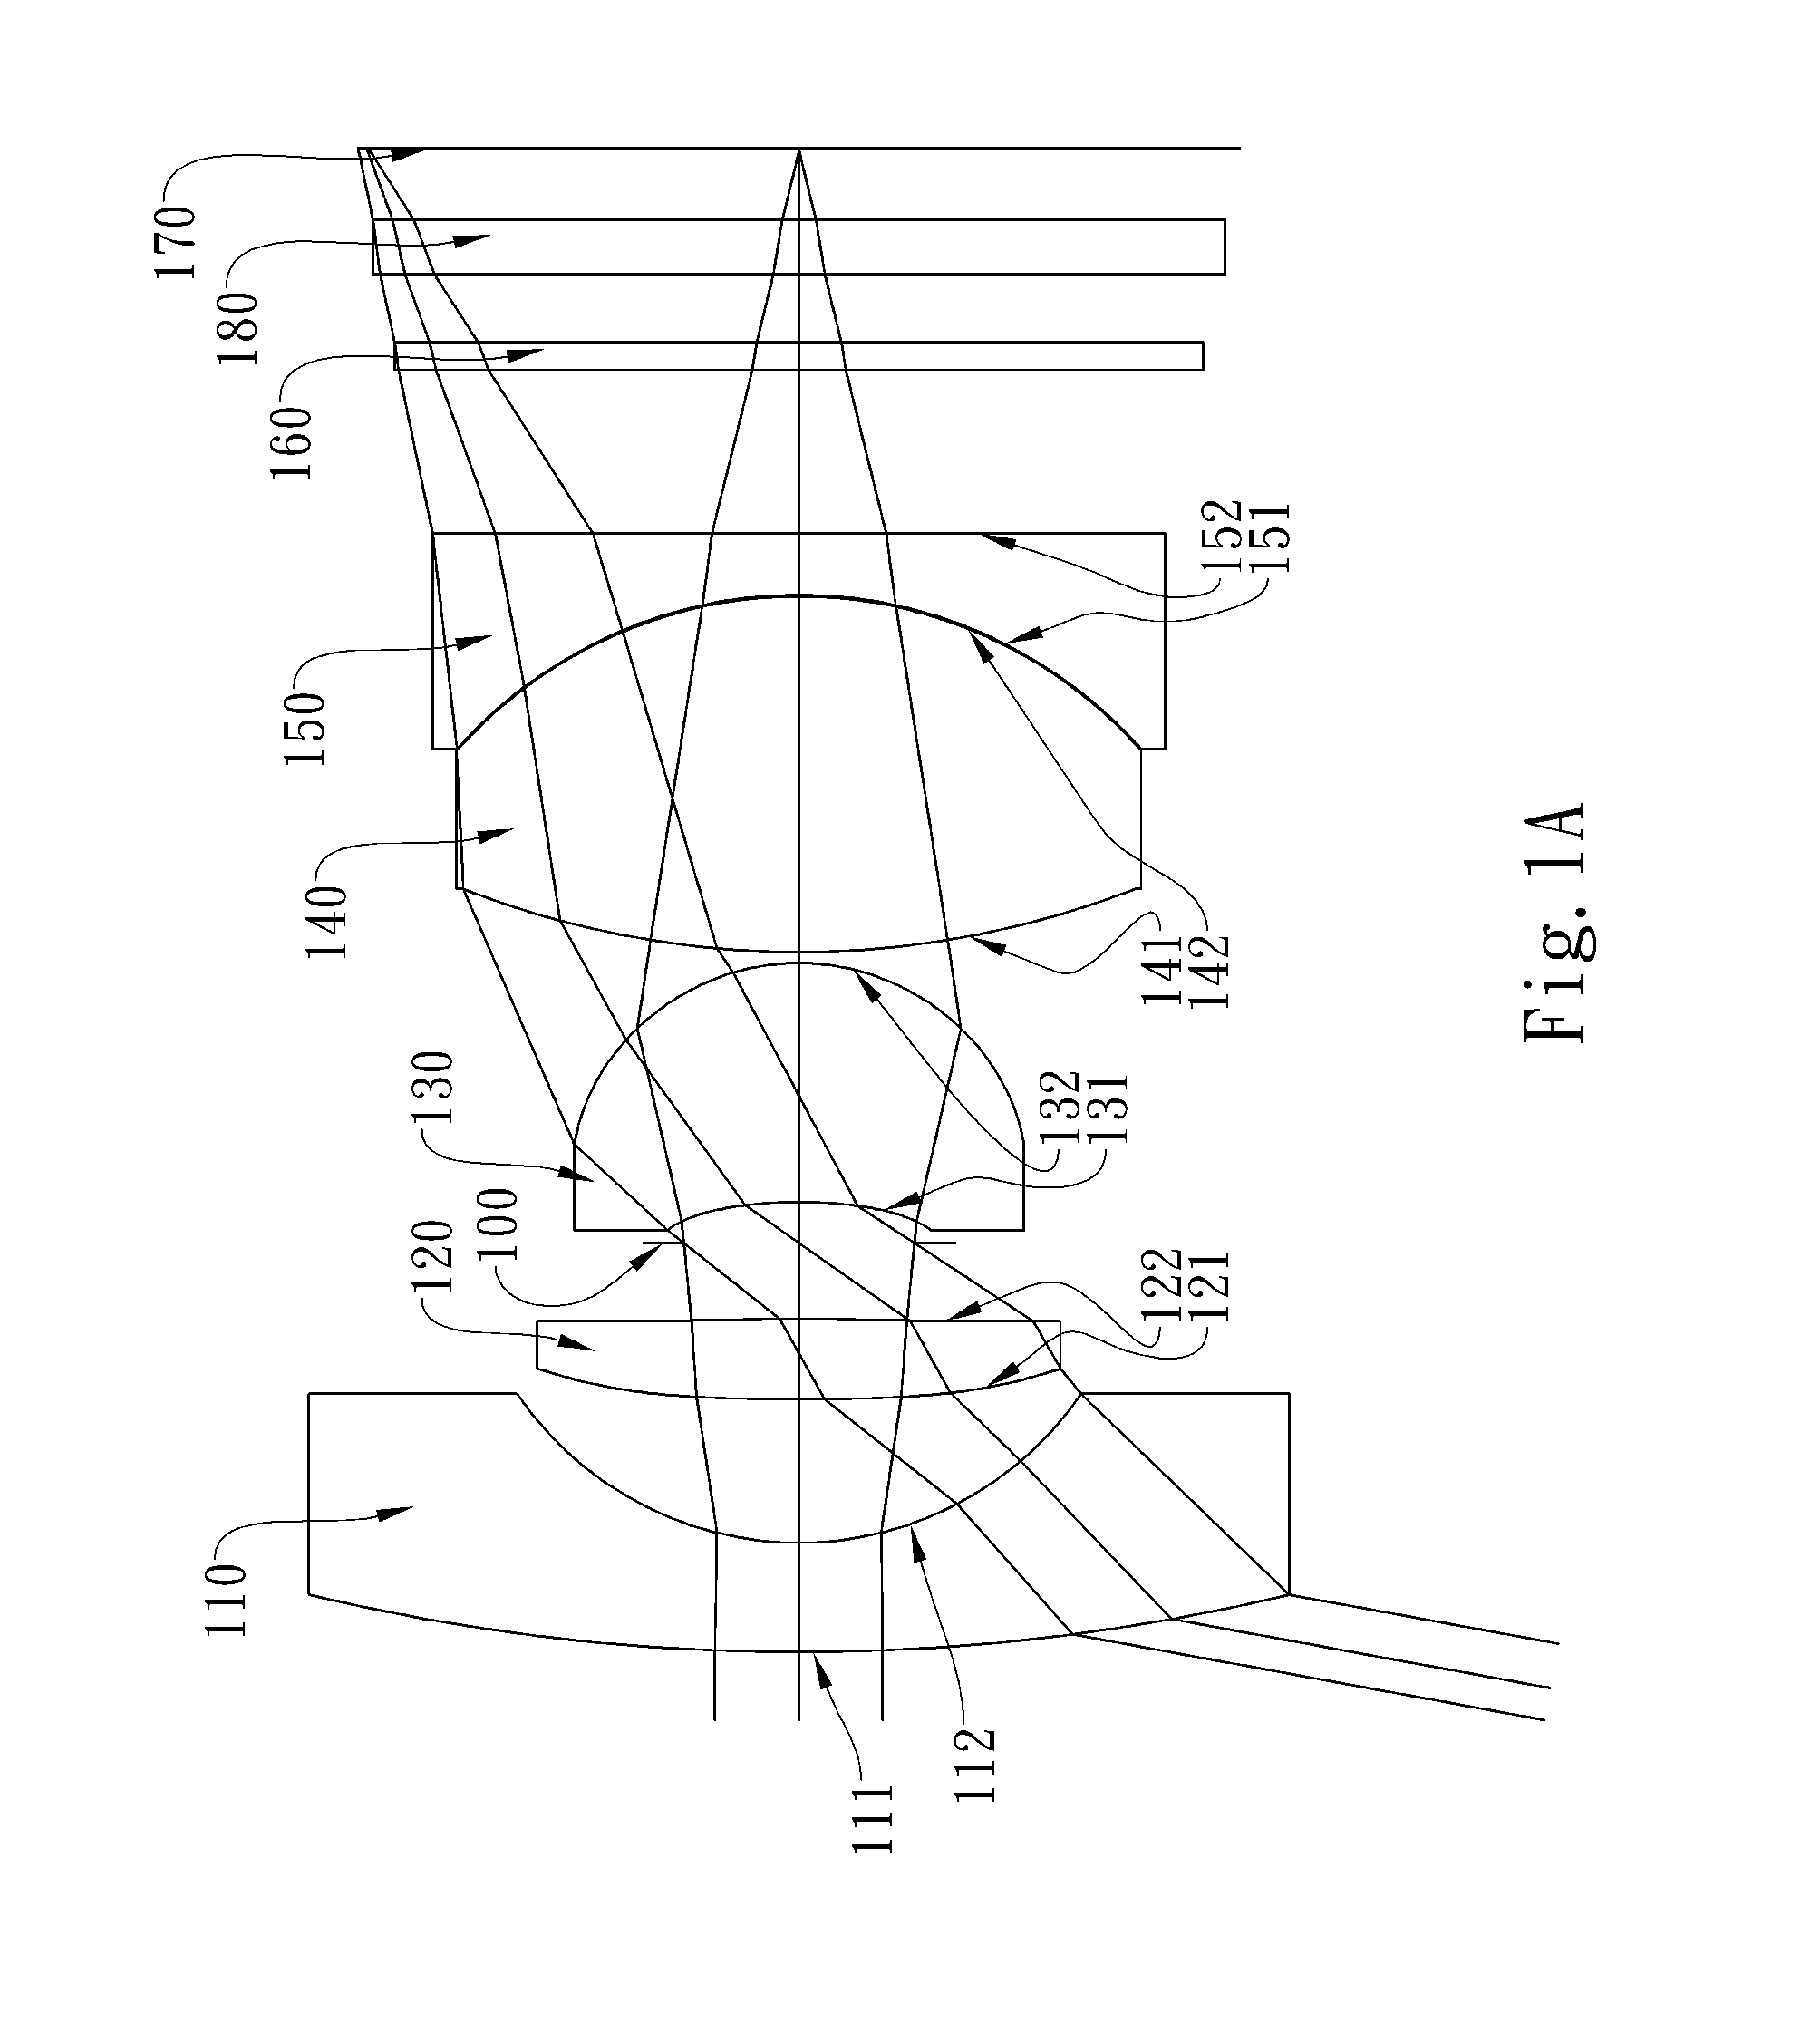 Wide-viewing-angle imaging lens assembly